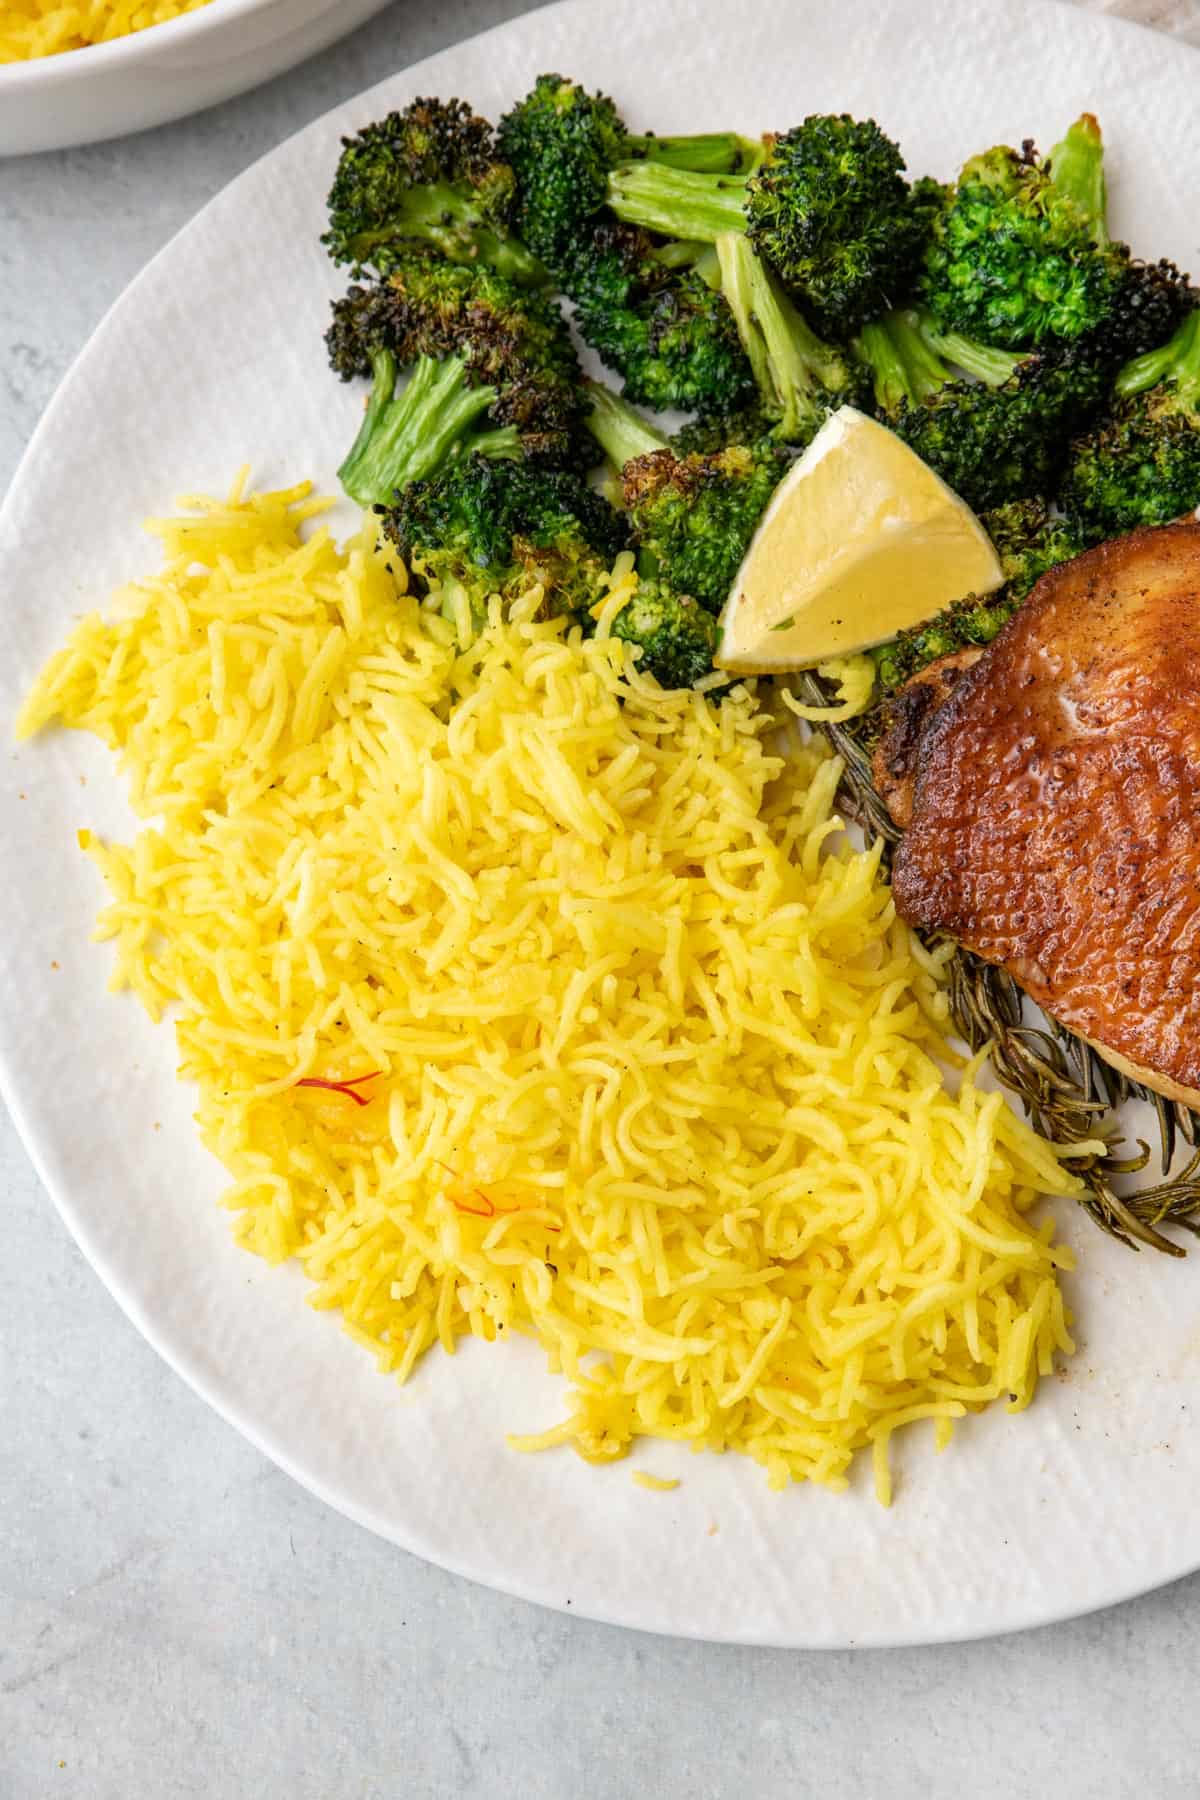 Saffron rice on a plate next to broccoli and a chicken thigh.